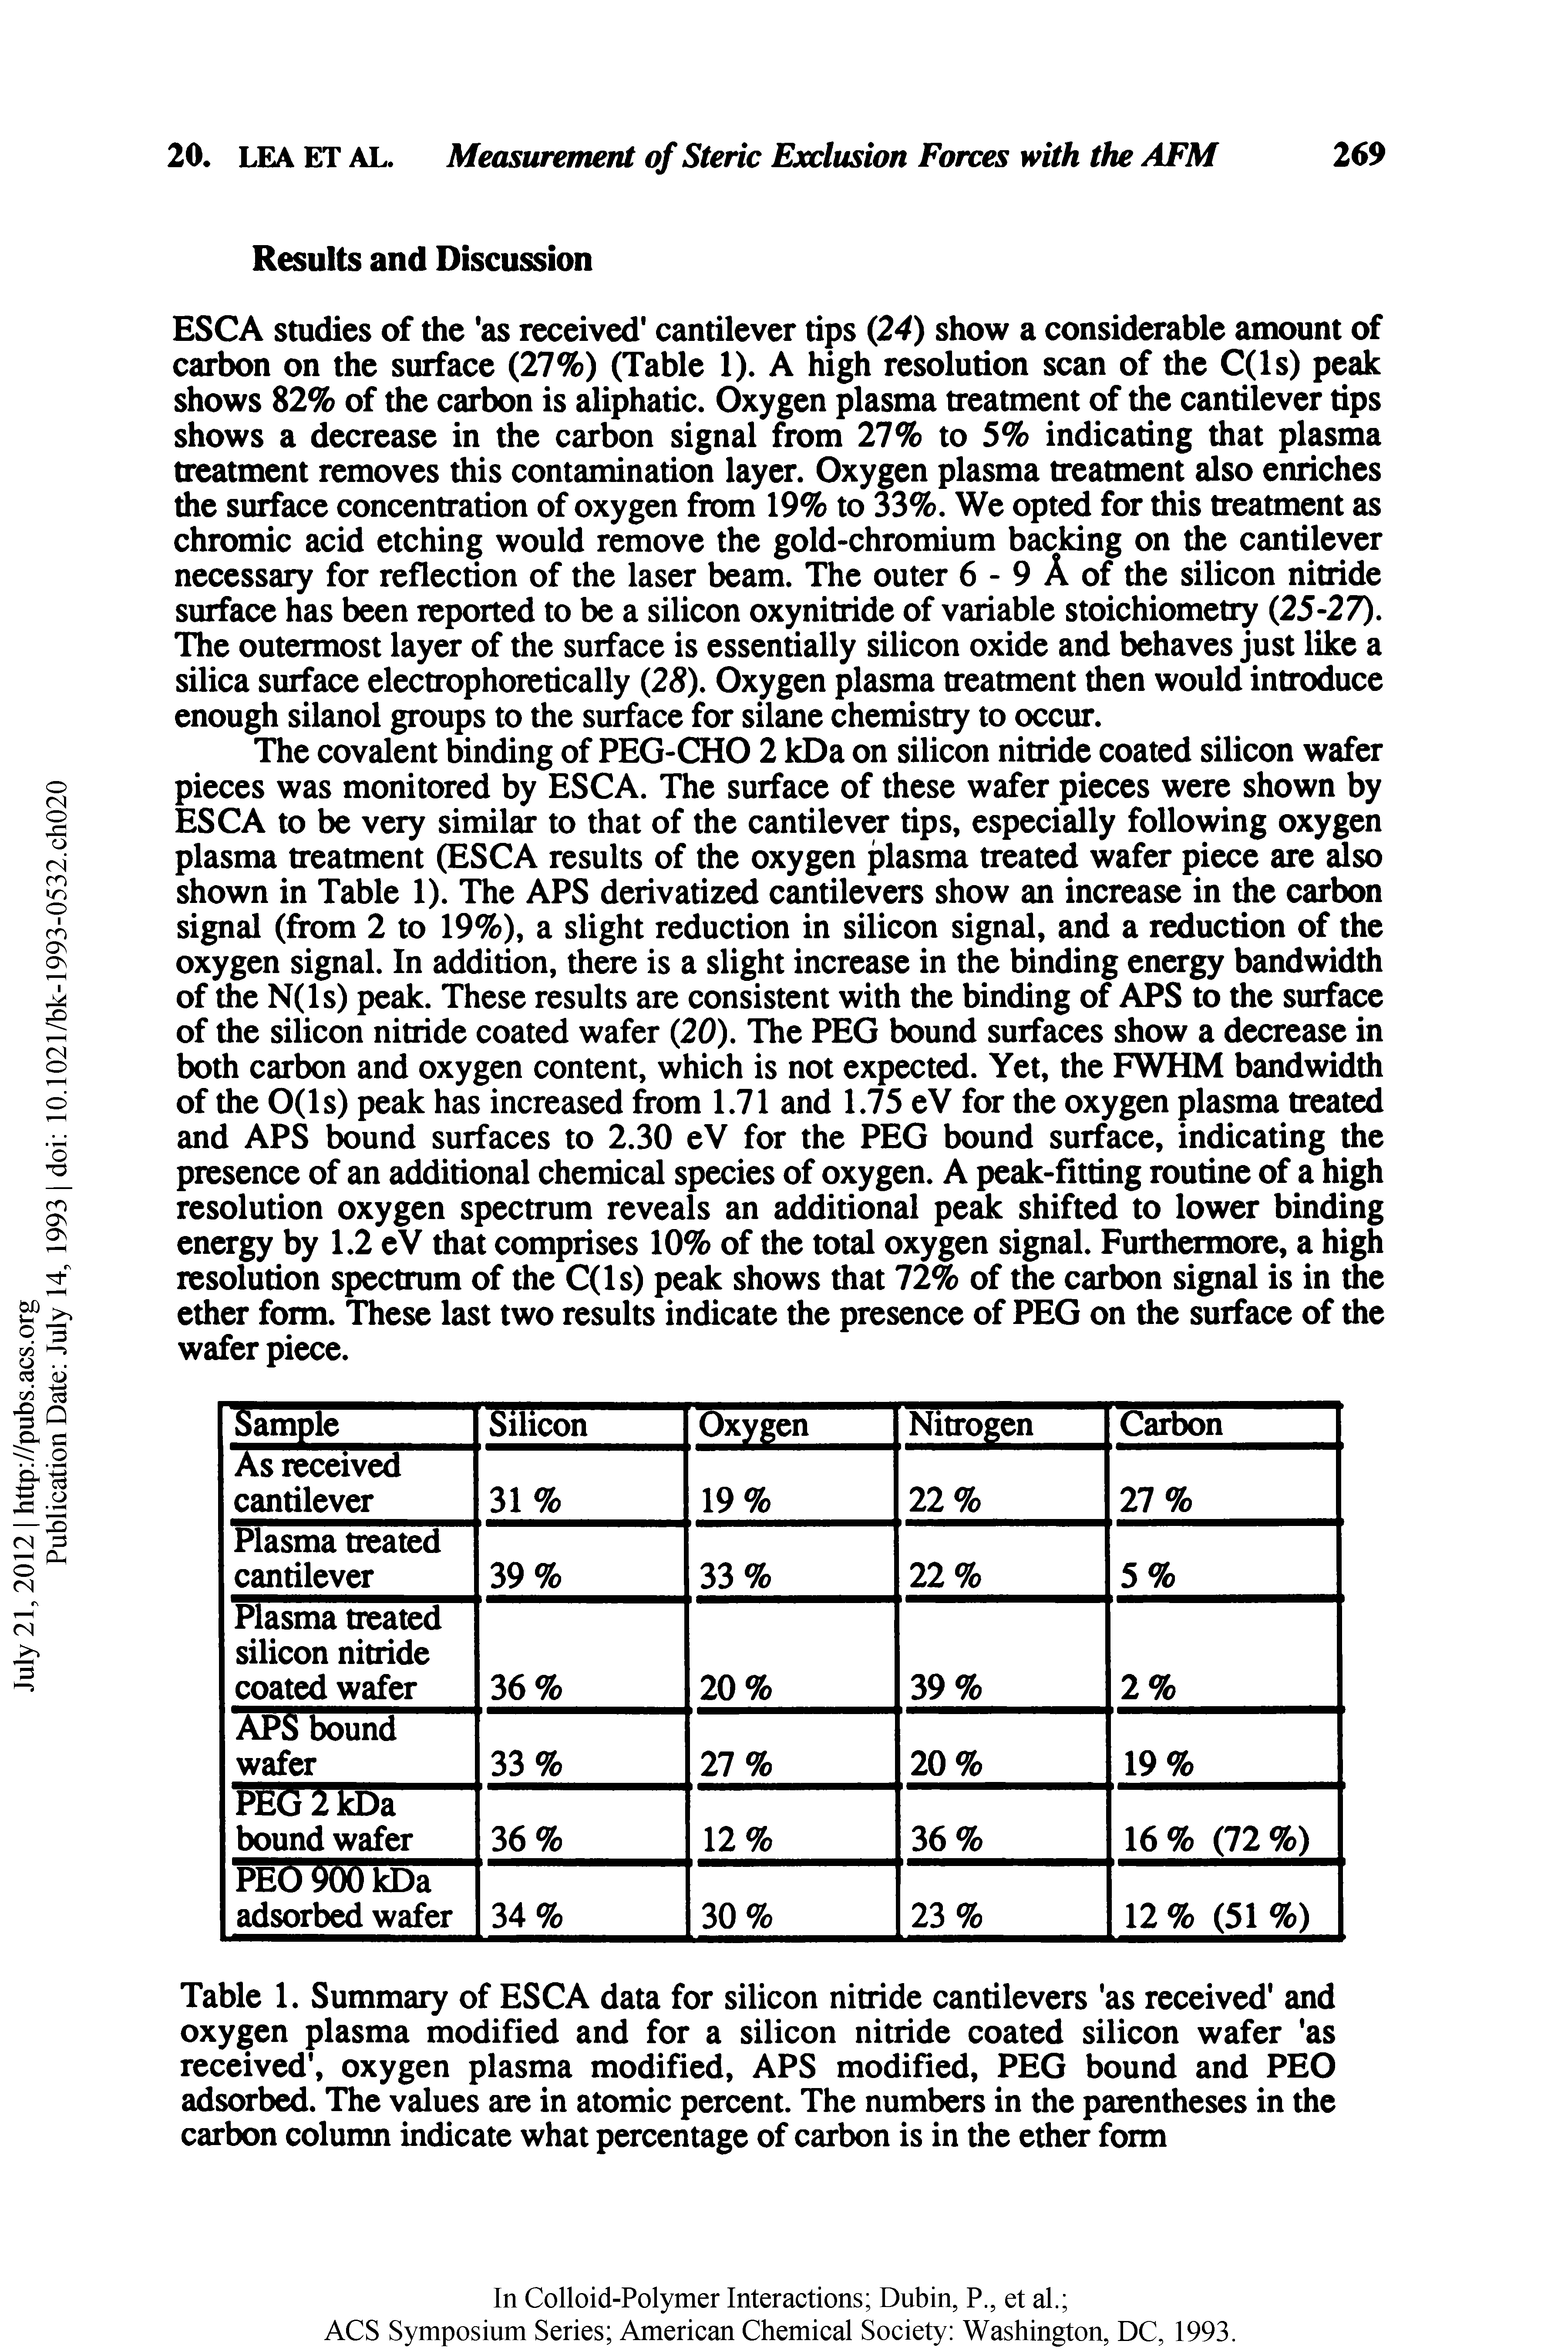 Table 1. Summary of ESCA data for silicon nitride cantilevers as received and oxygen plasma modified and for a silicon nitride coated silicon wafer as received, oxygen plasma modified, APS modified, PEG bound and PEO adsorbed. The values are in atomic percent. The numbers in the parentheses in the carbon column indicate what percentage of carbon is in the ether form...